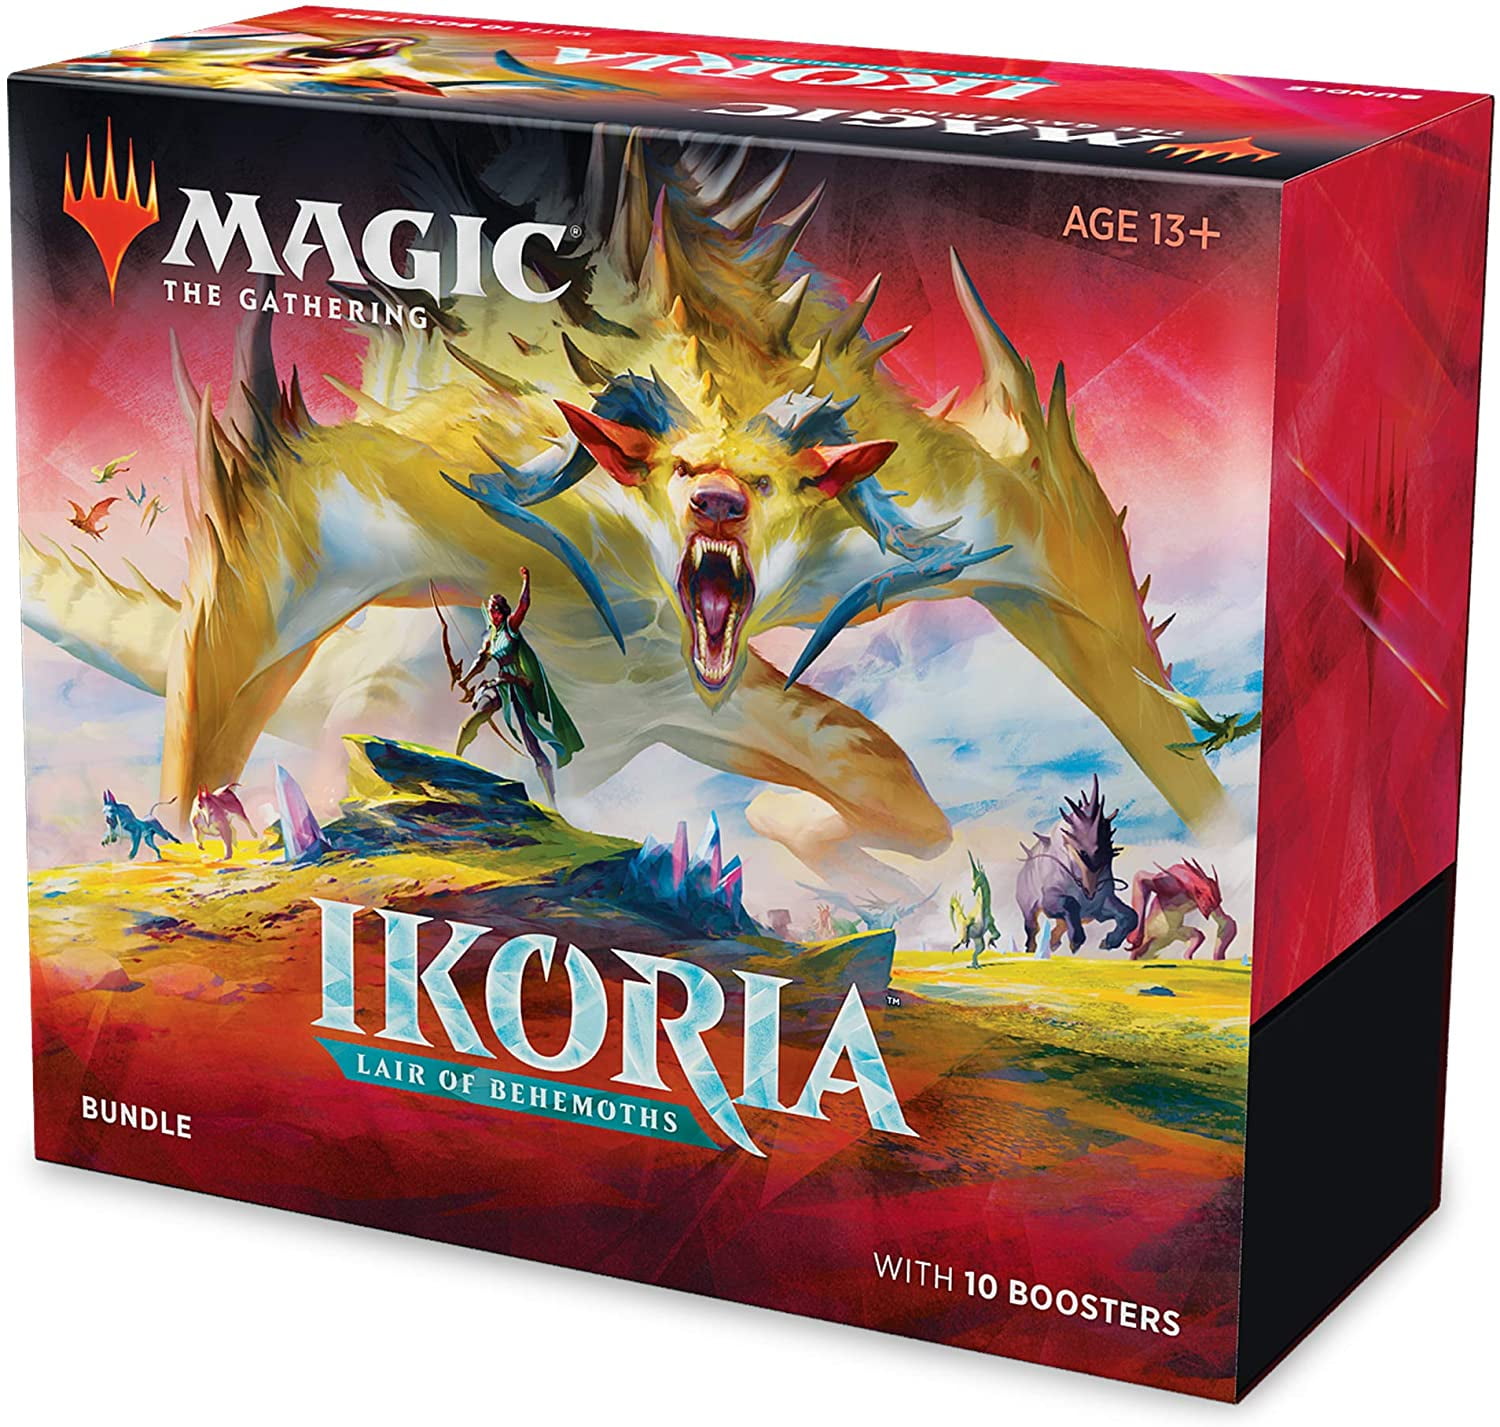 IKORIA Lair of Behemoths COLLECTOR Booster Box sealed Magic the Gathering 